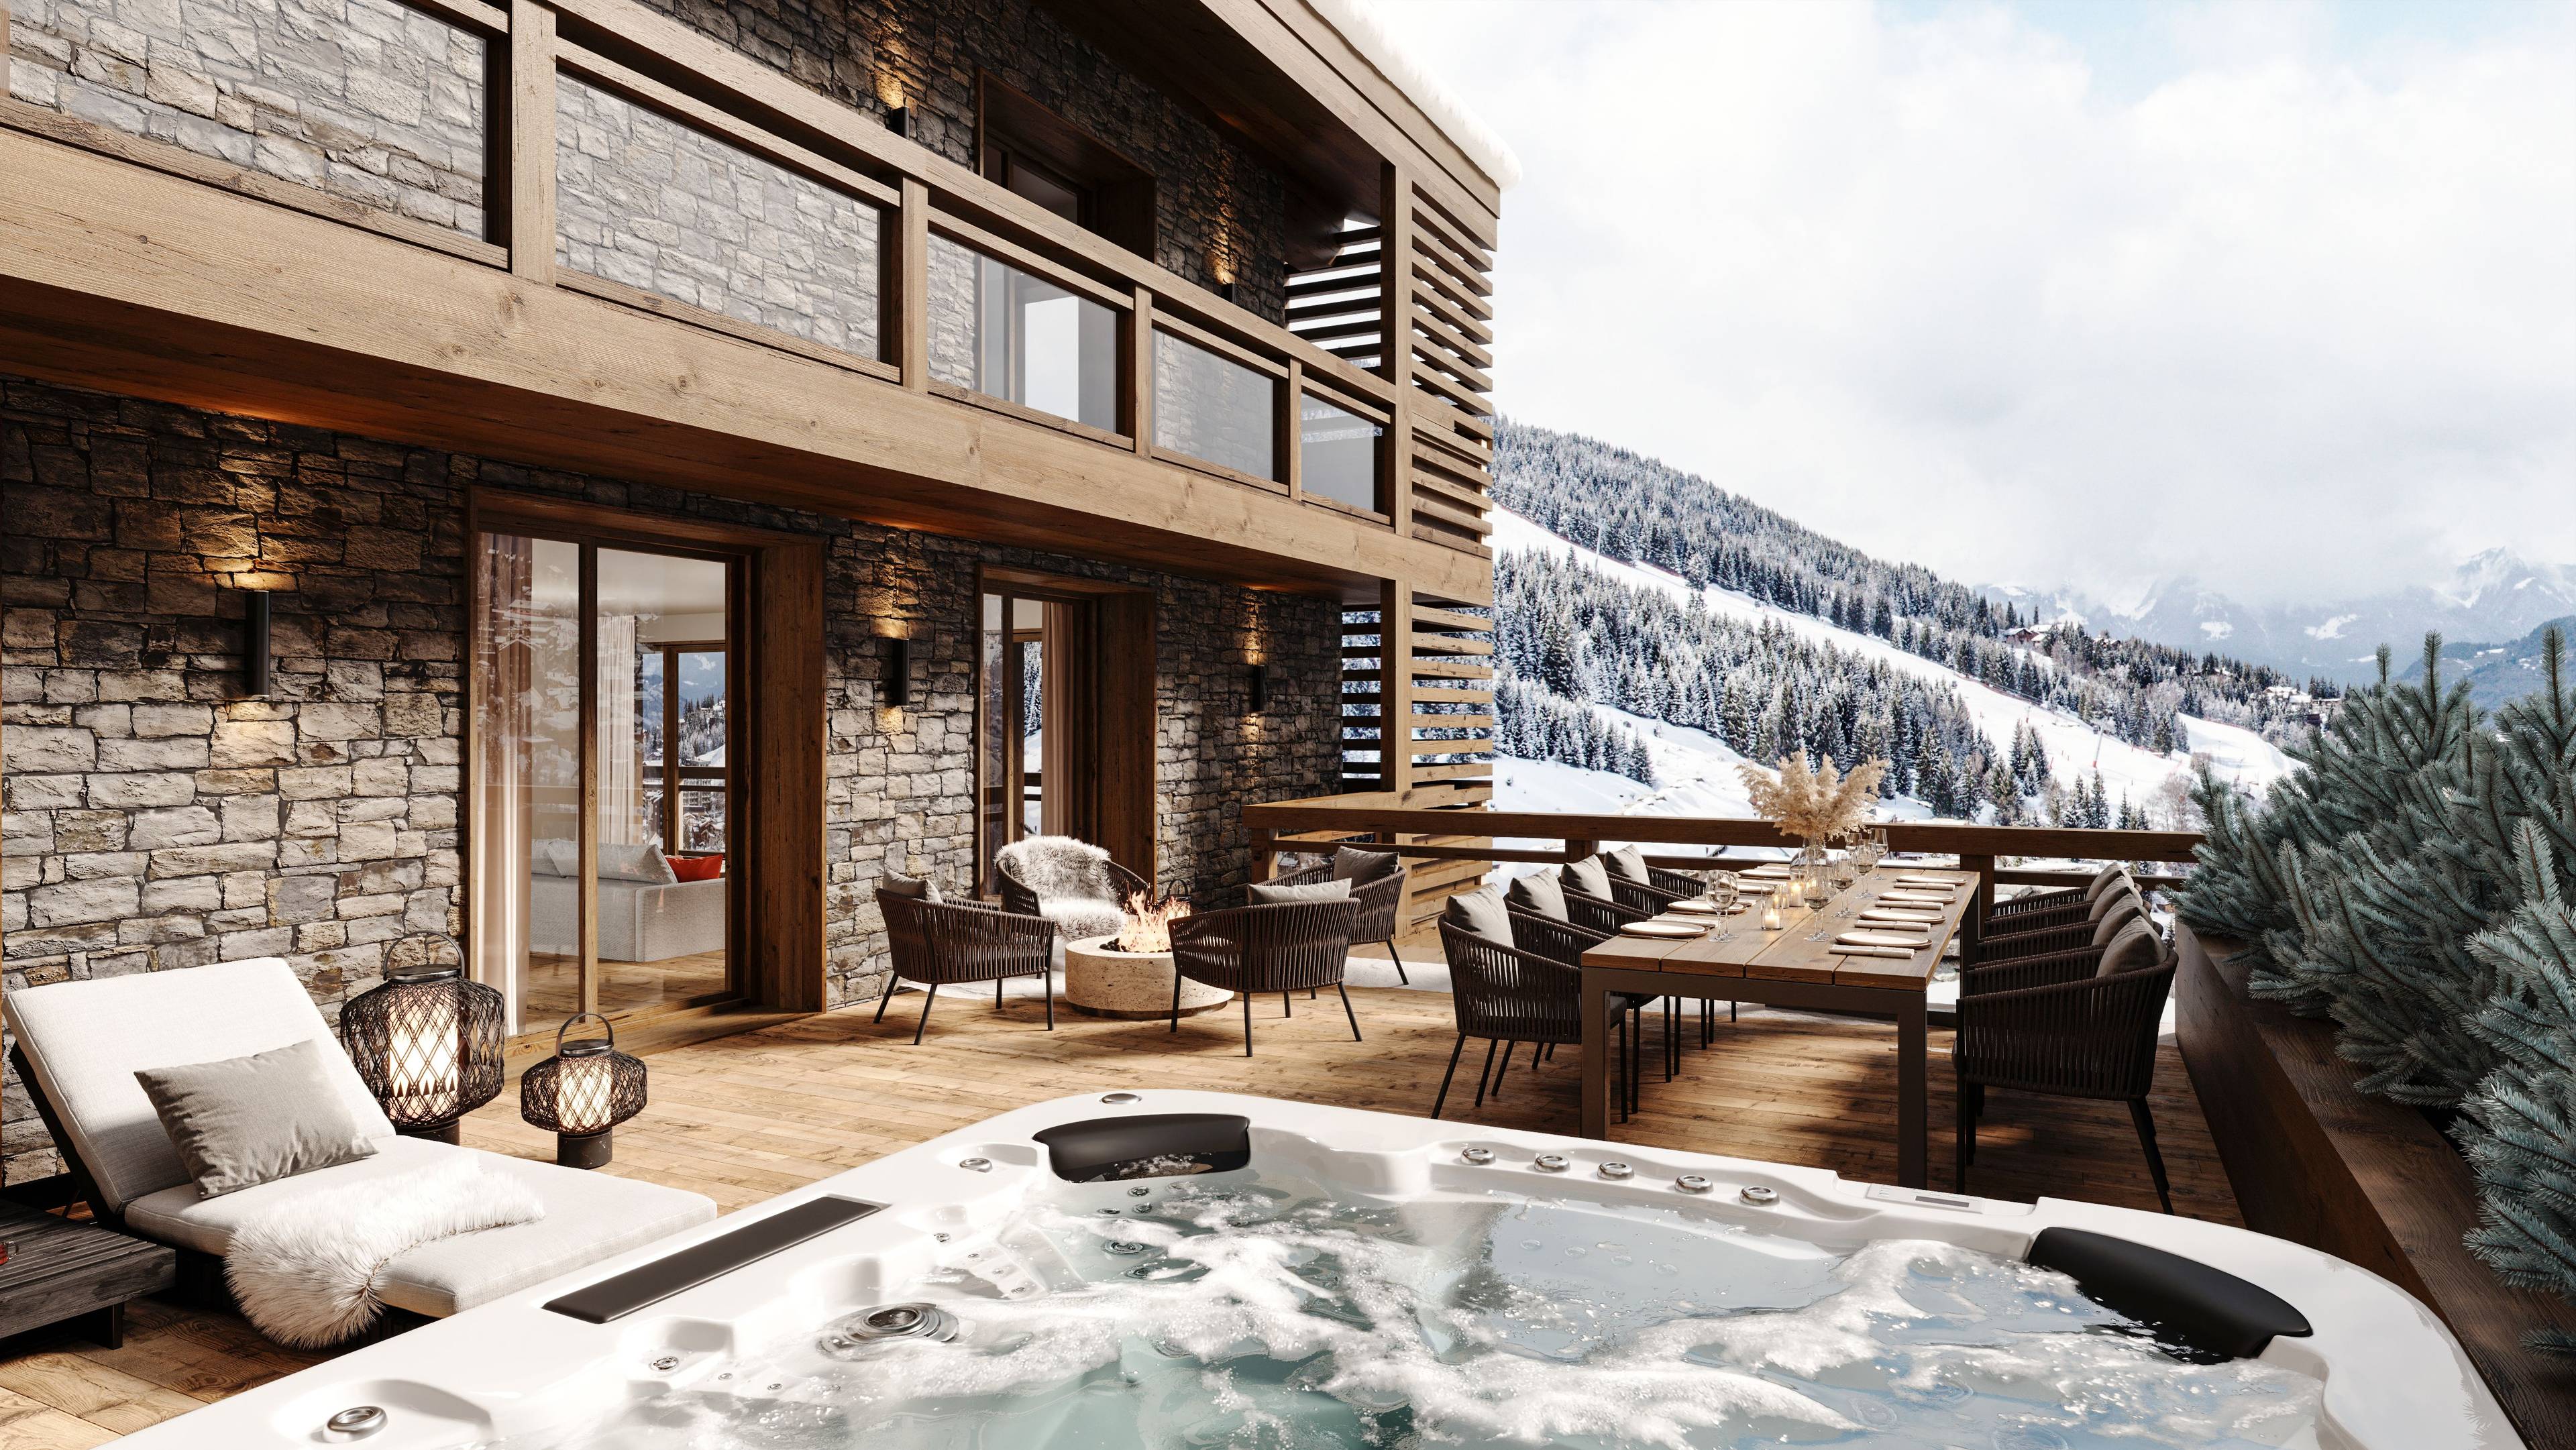 Steps From The Slopes: An Alpine Escape in Courchevel, France